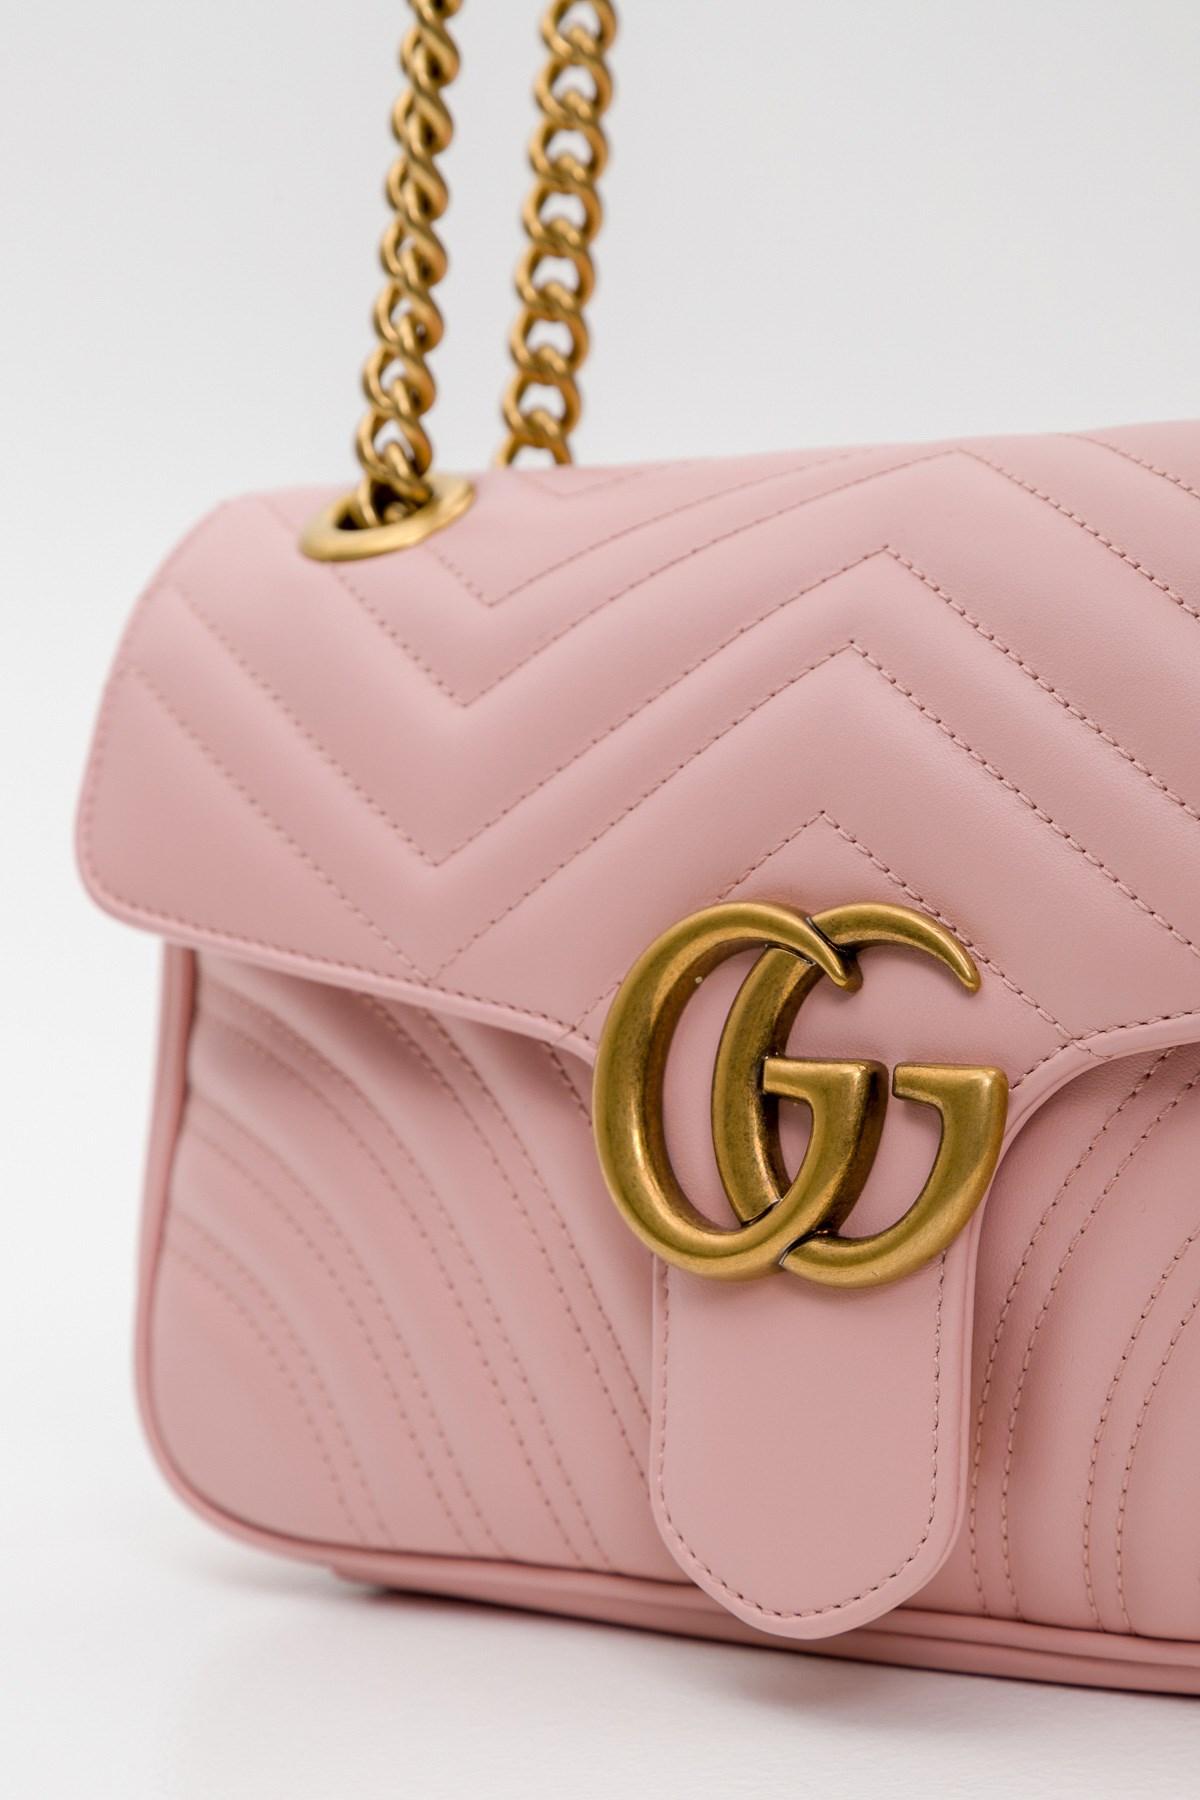 Lyst - Gucci Gg Marmont Small Shoulder Bag in Pink